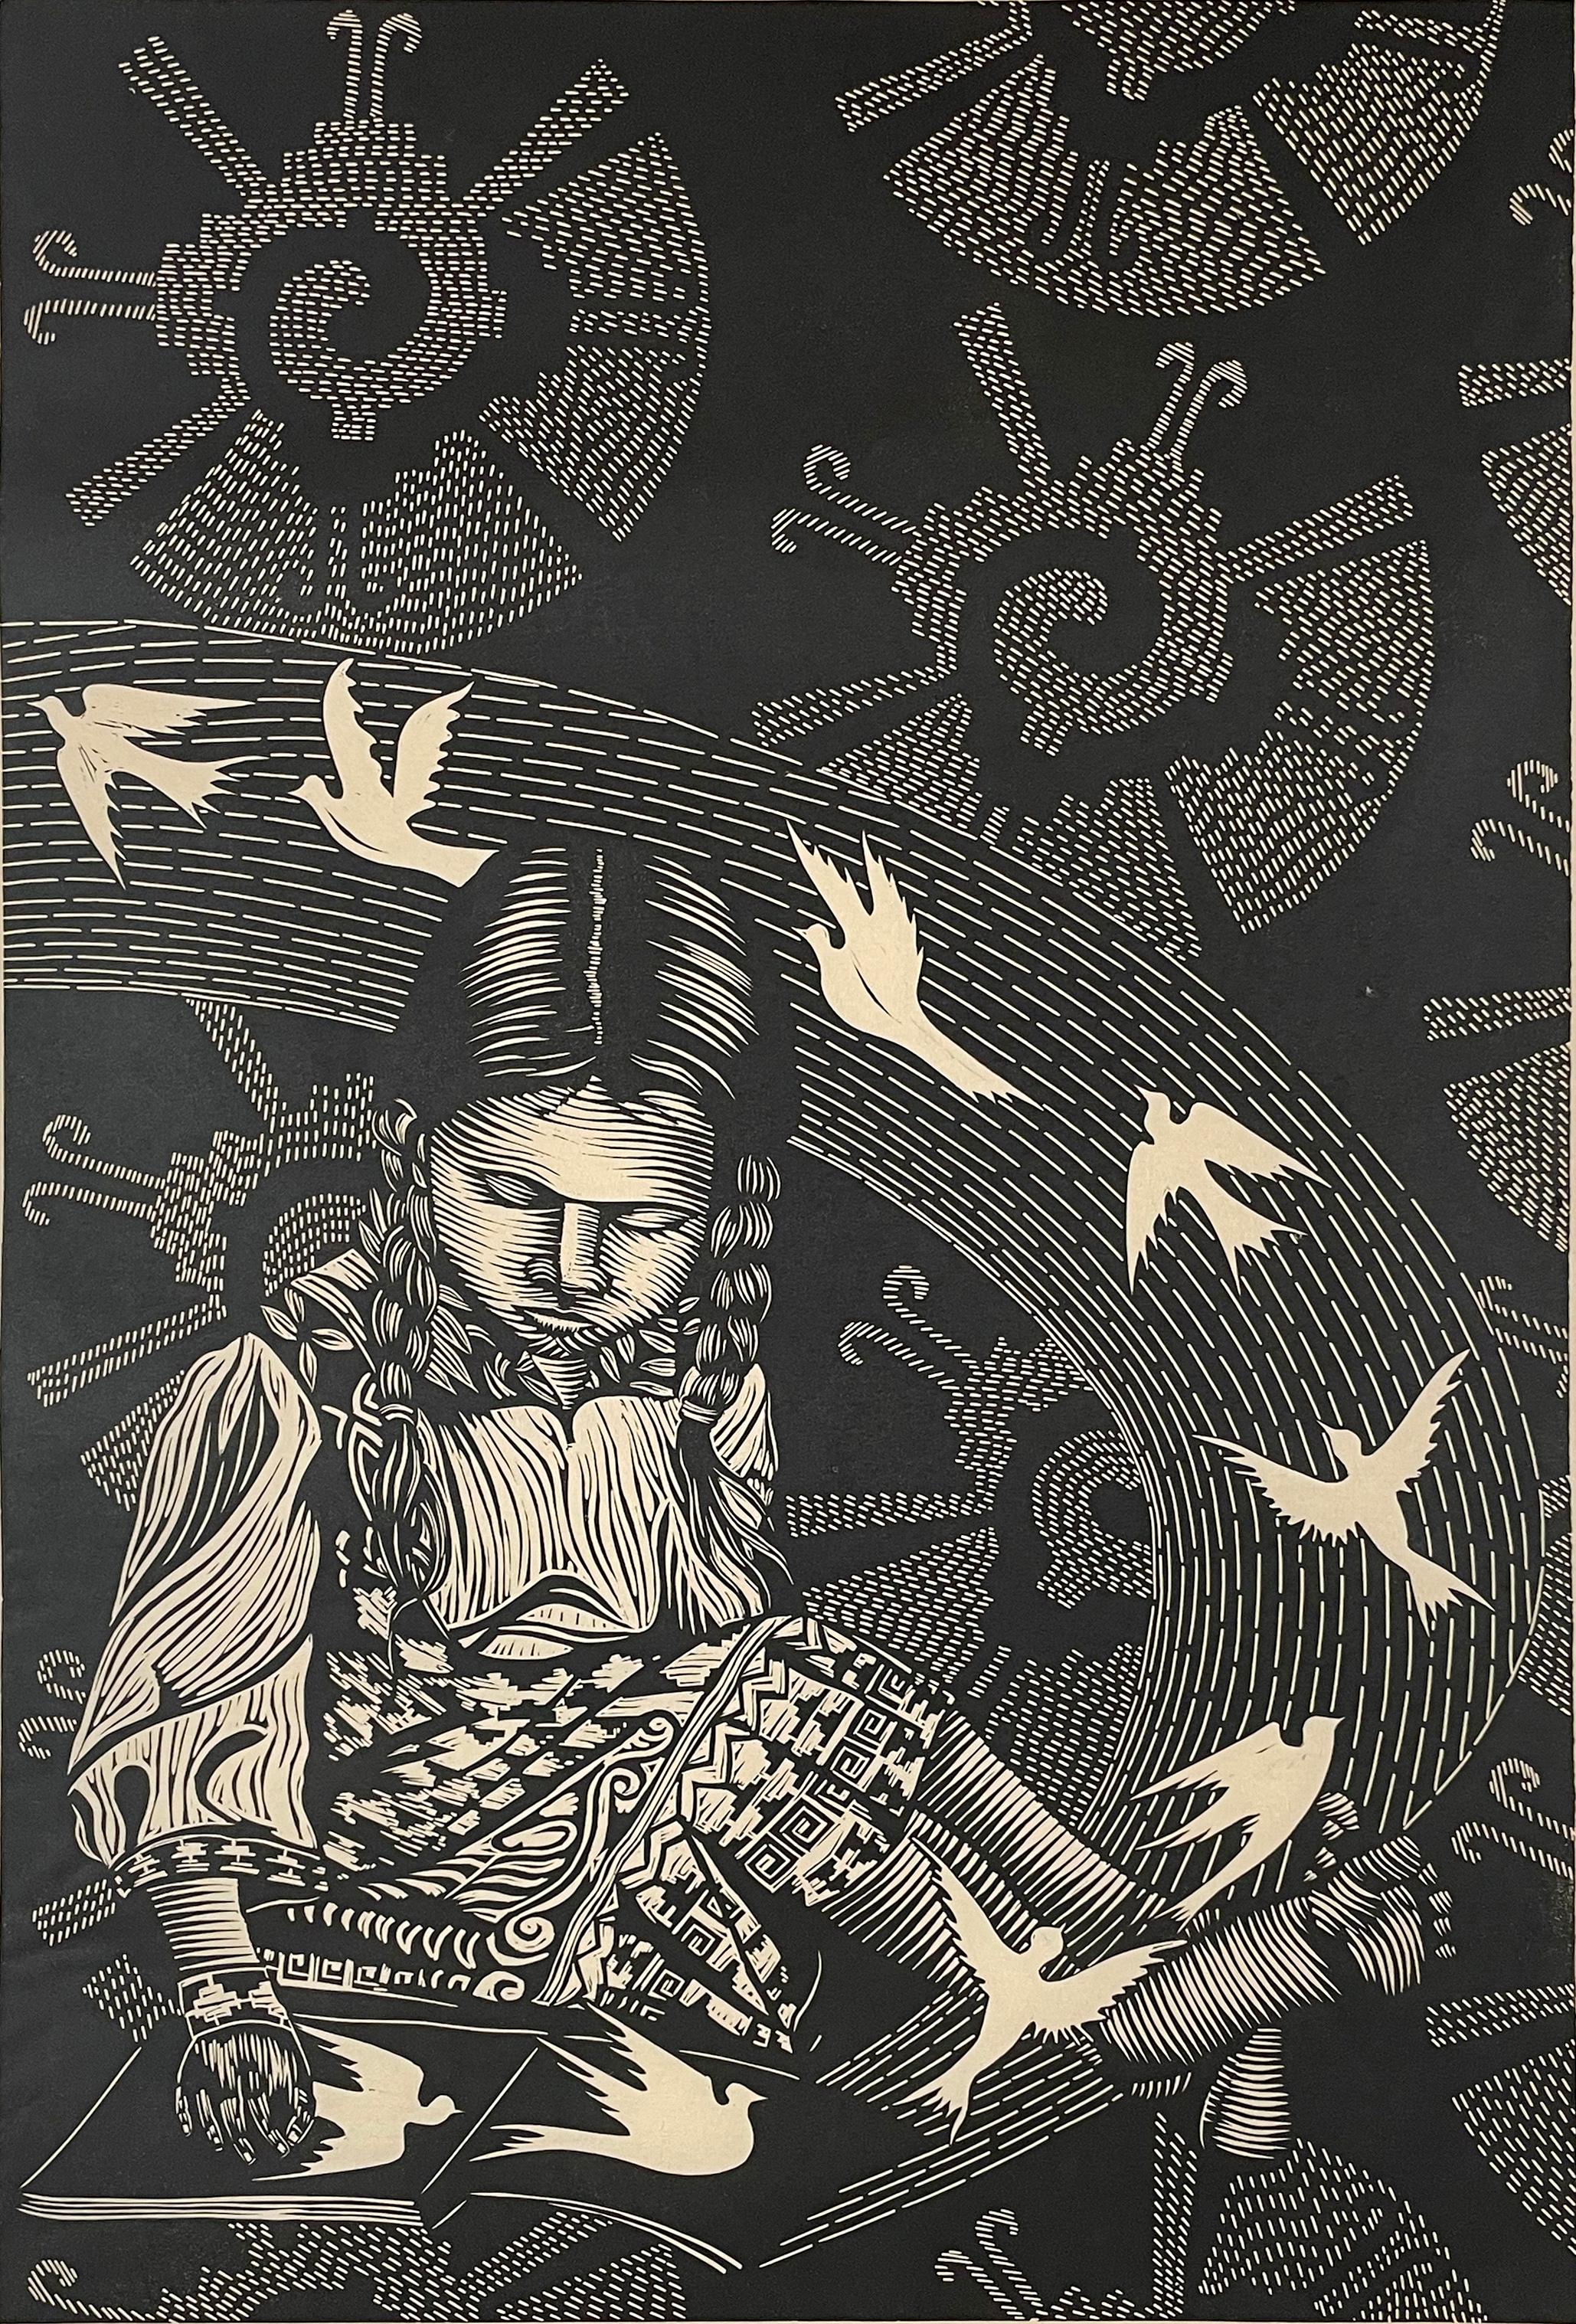 Medium: linocut
Year: 2019
Image Size: 24 x 16 inches
Edition of 10

Young indigenous girl against a backdrop that includes the Mayan symbol for God, along with doves taking flight from a book she has opened.

As a cultural